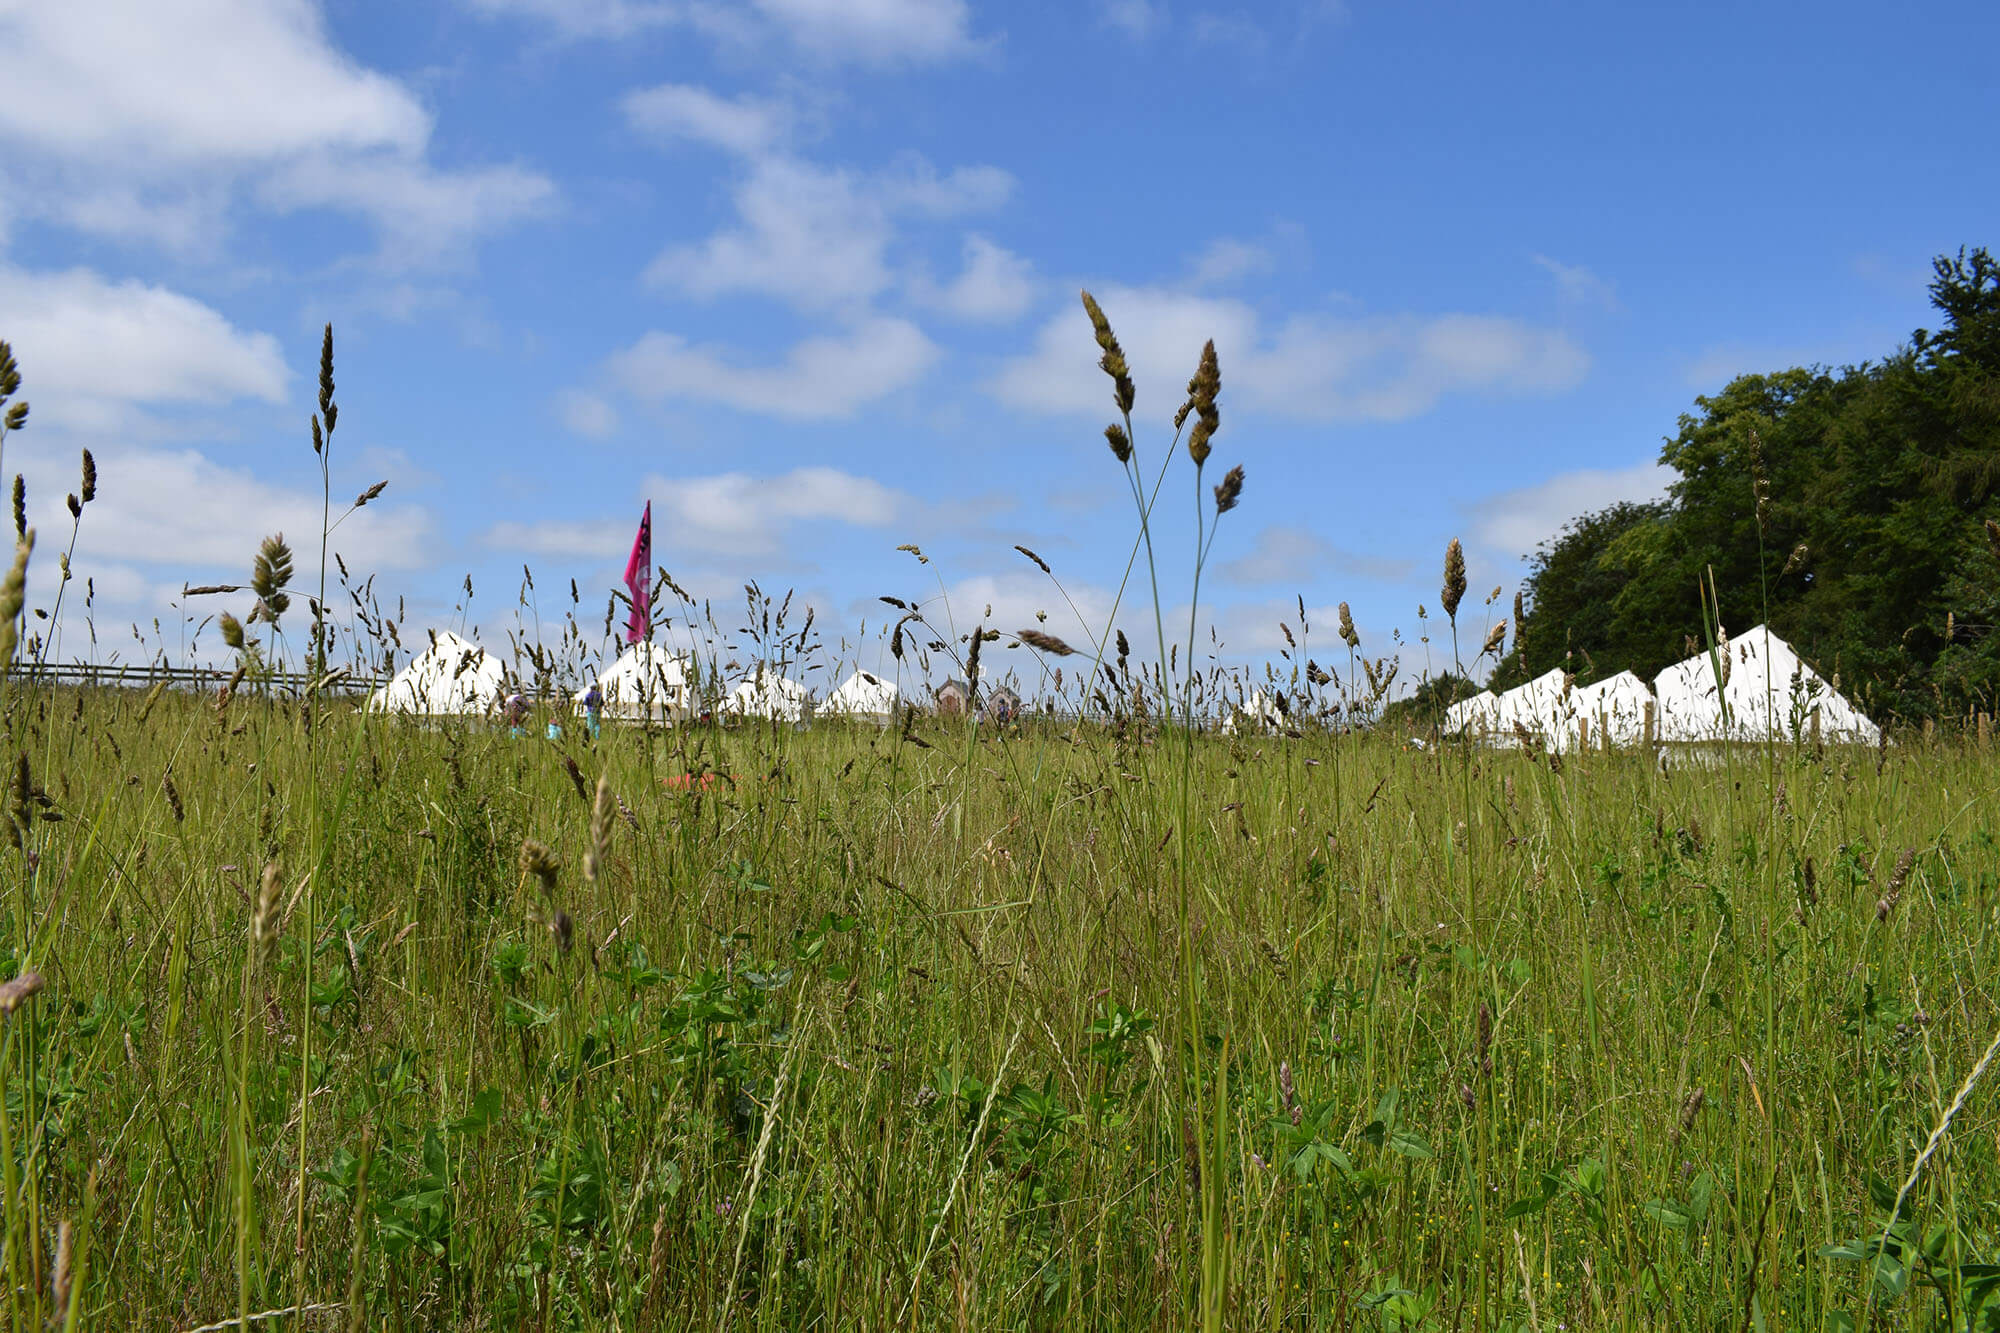 farm camp residential at sacrewell - bell tents in field with long grass and blue sky.